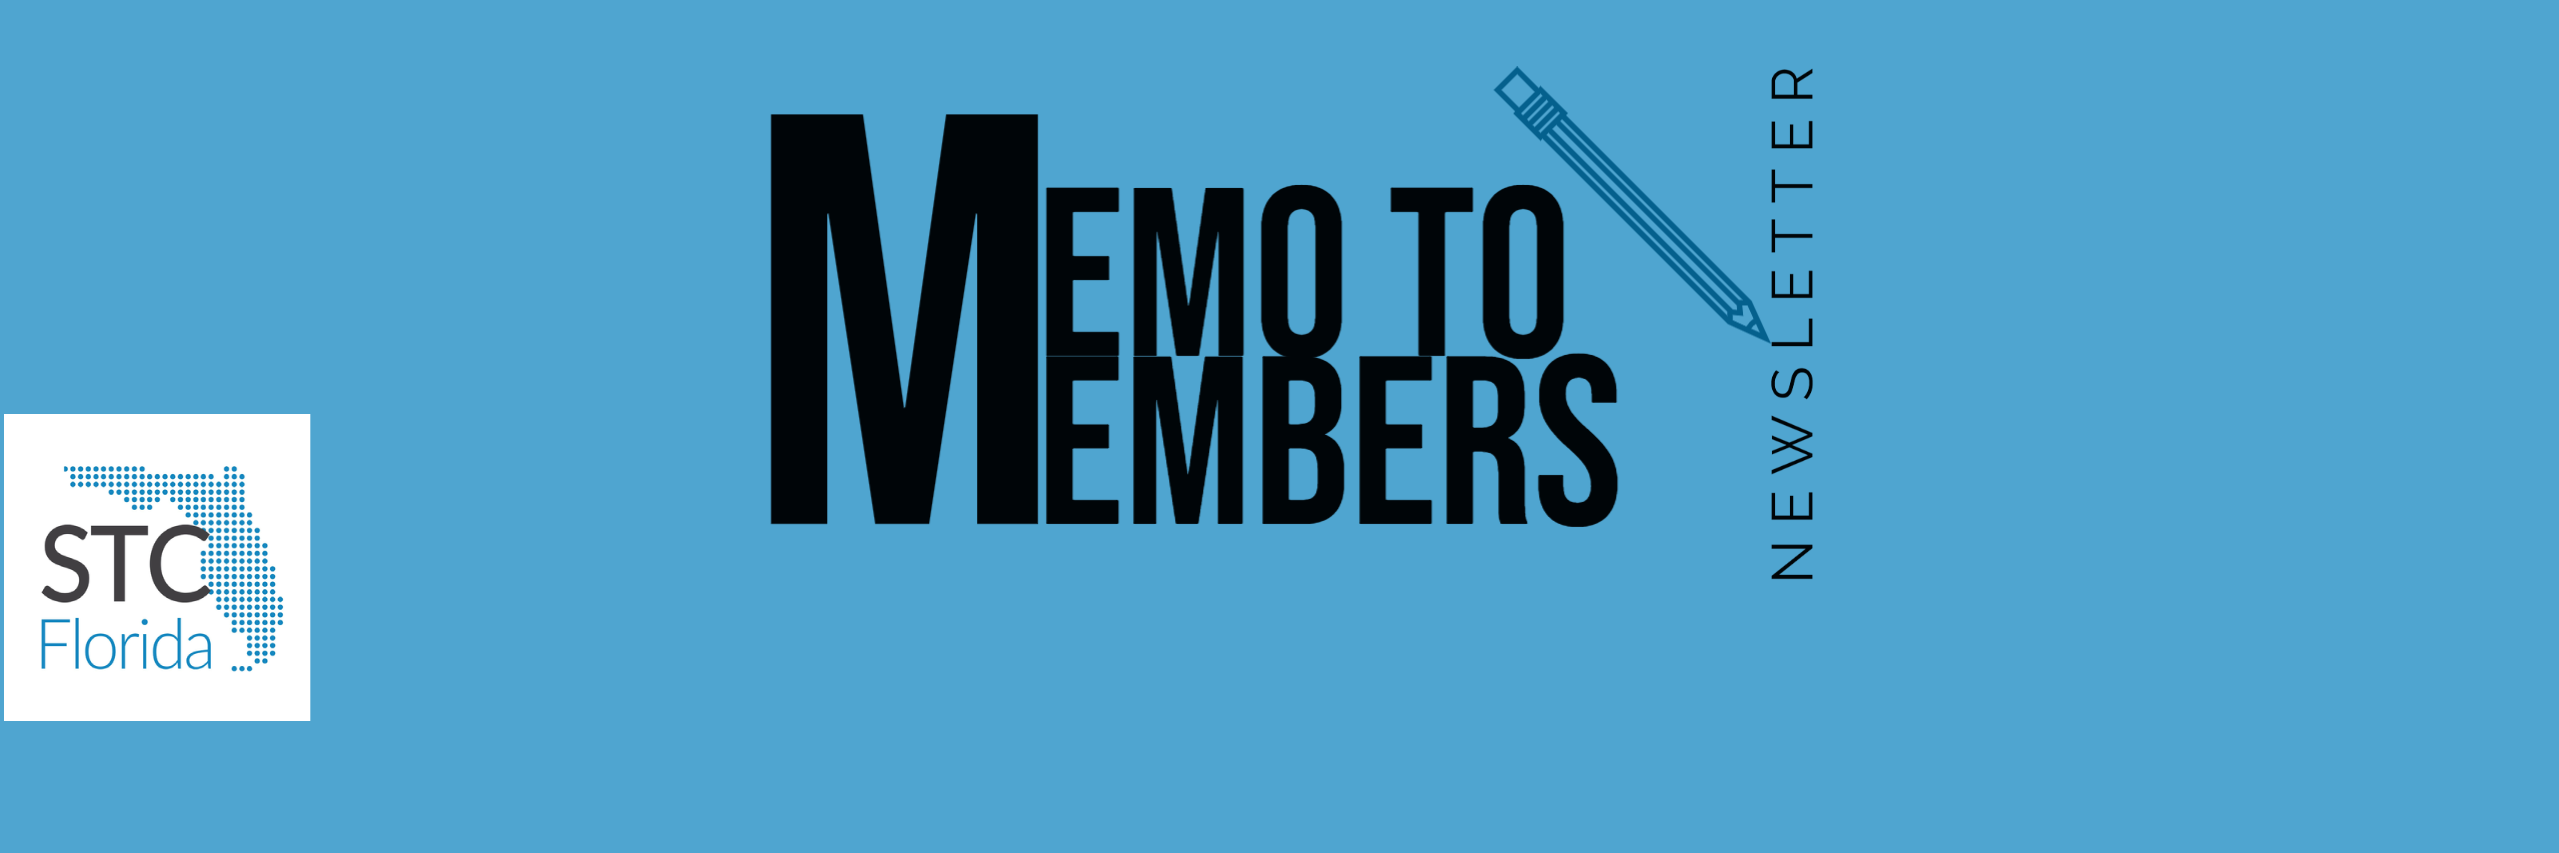 Jumpstart Your Active Membership by Winning Our New Member Campaign!